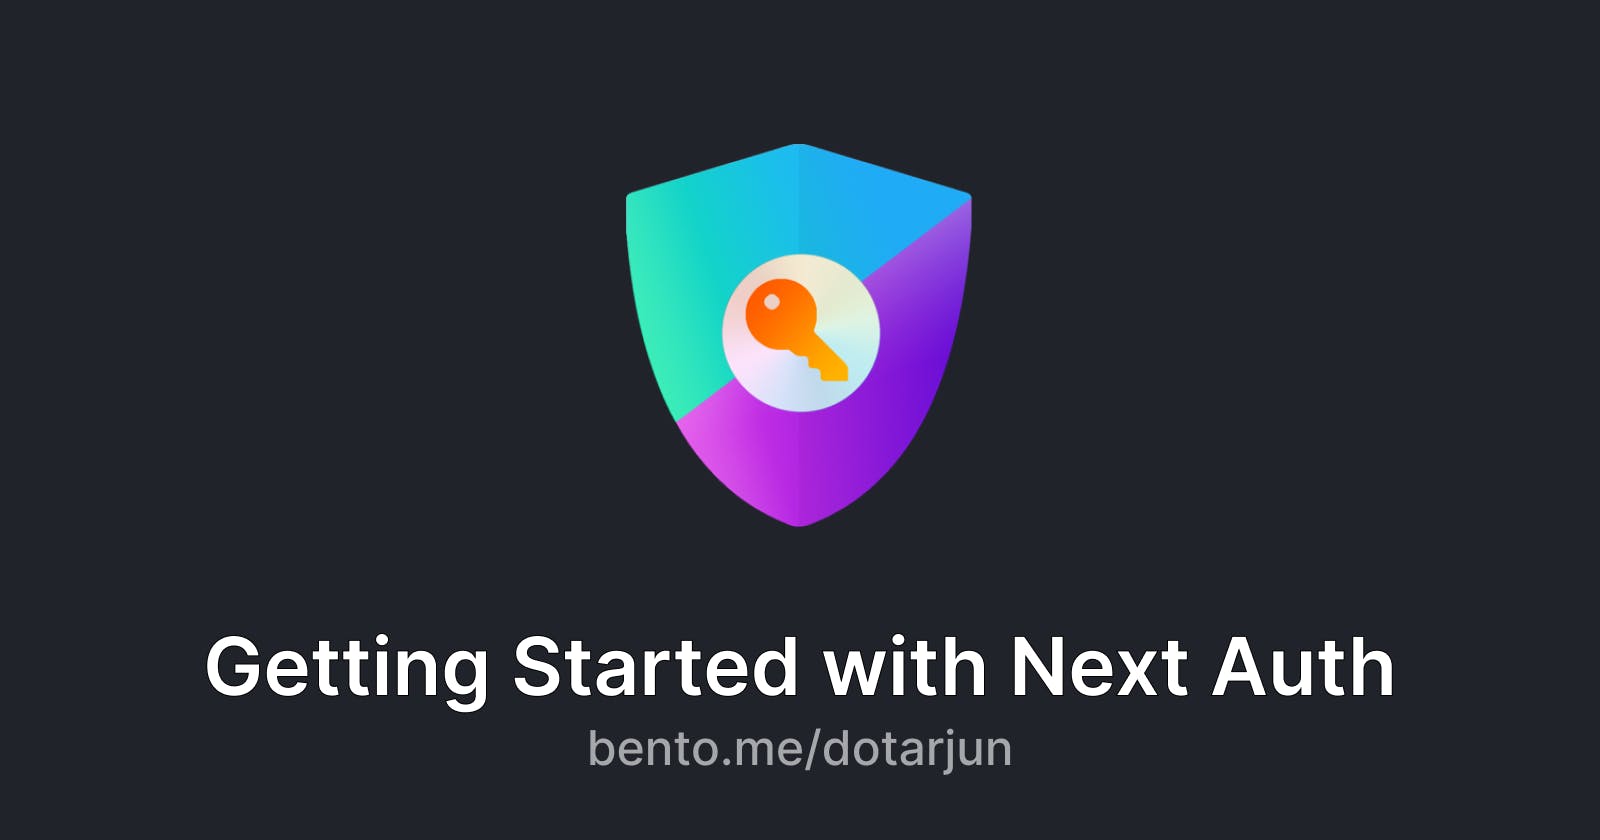 Getting Started with Next Auth